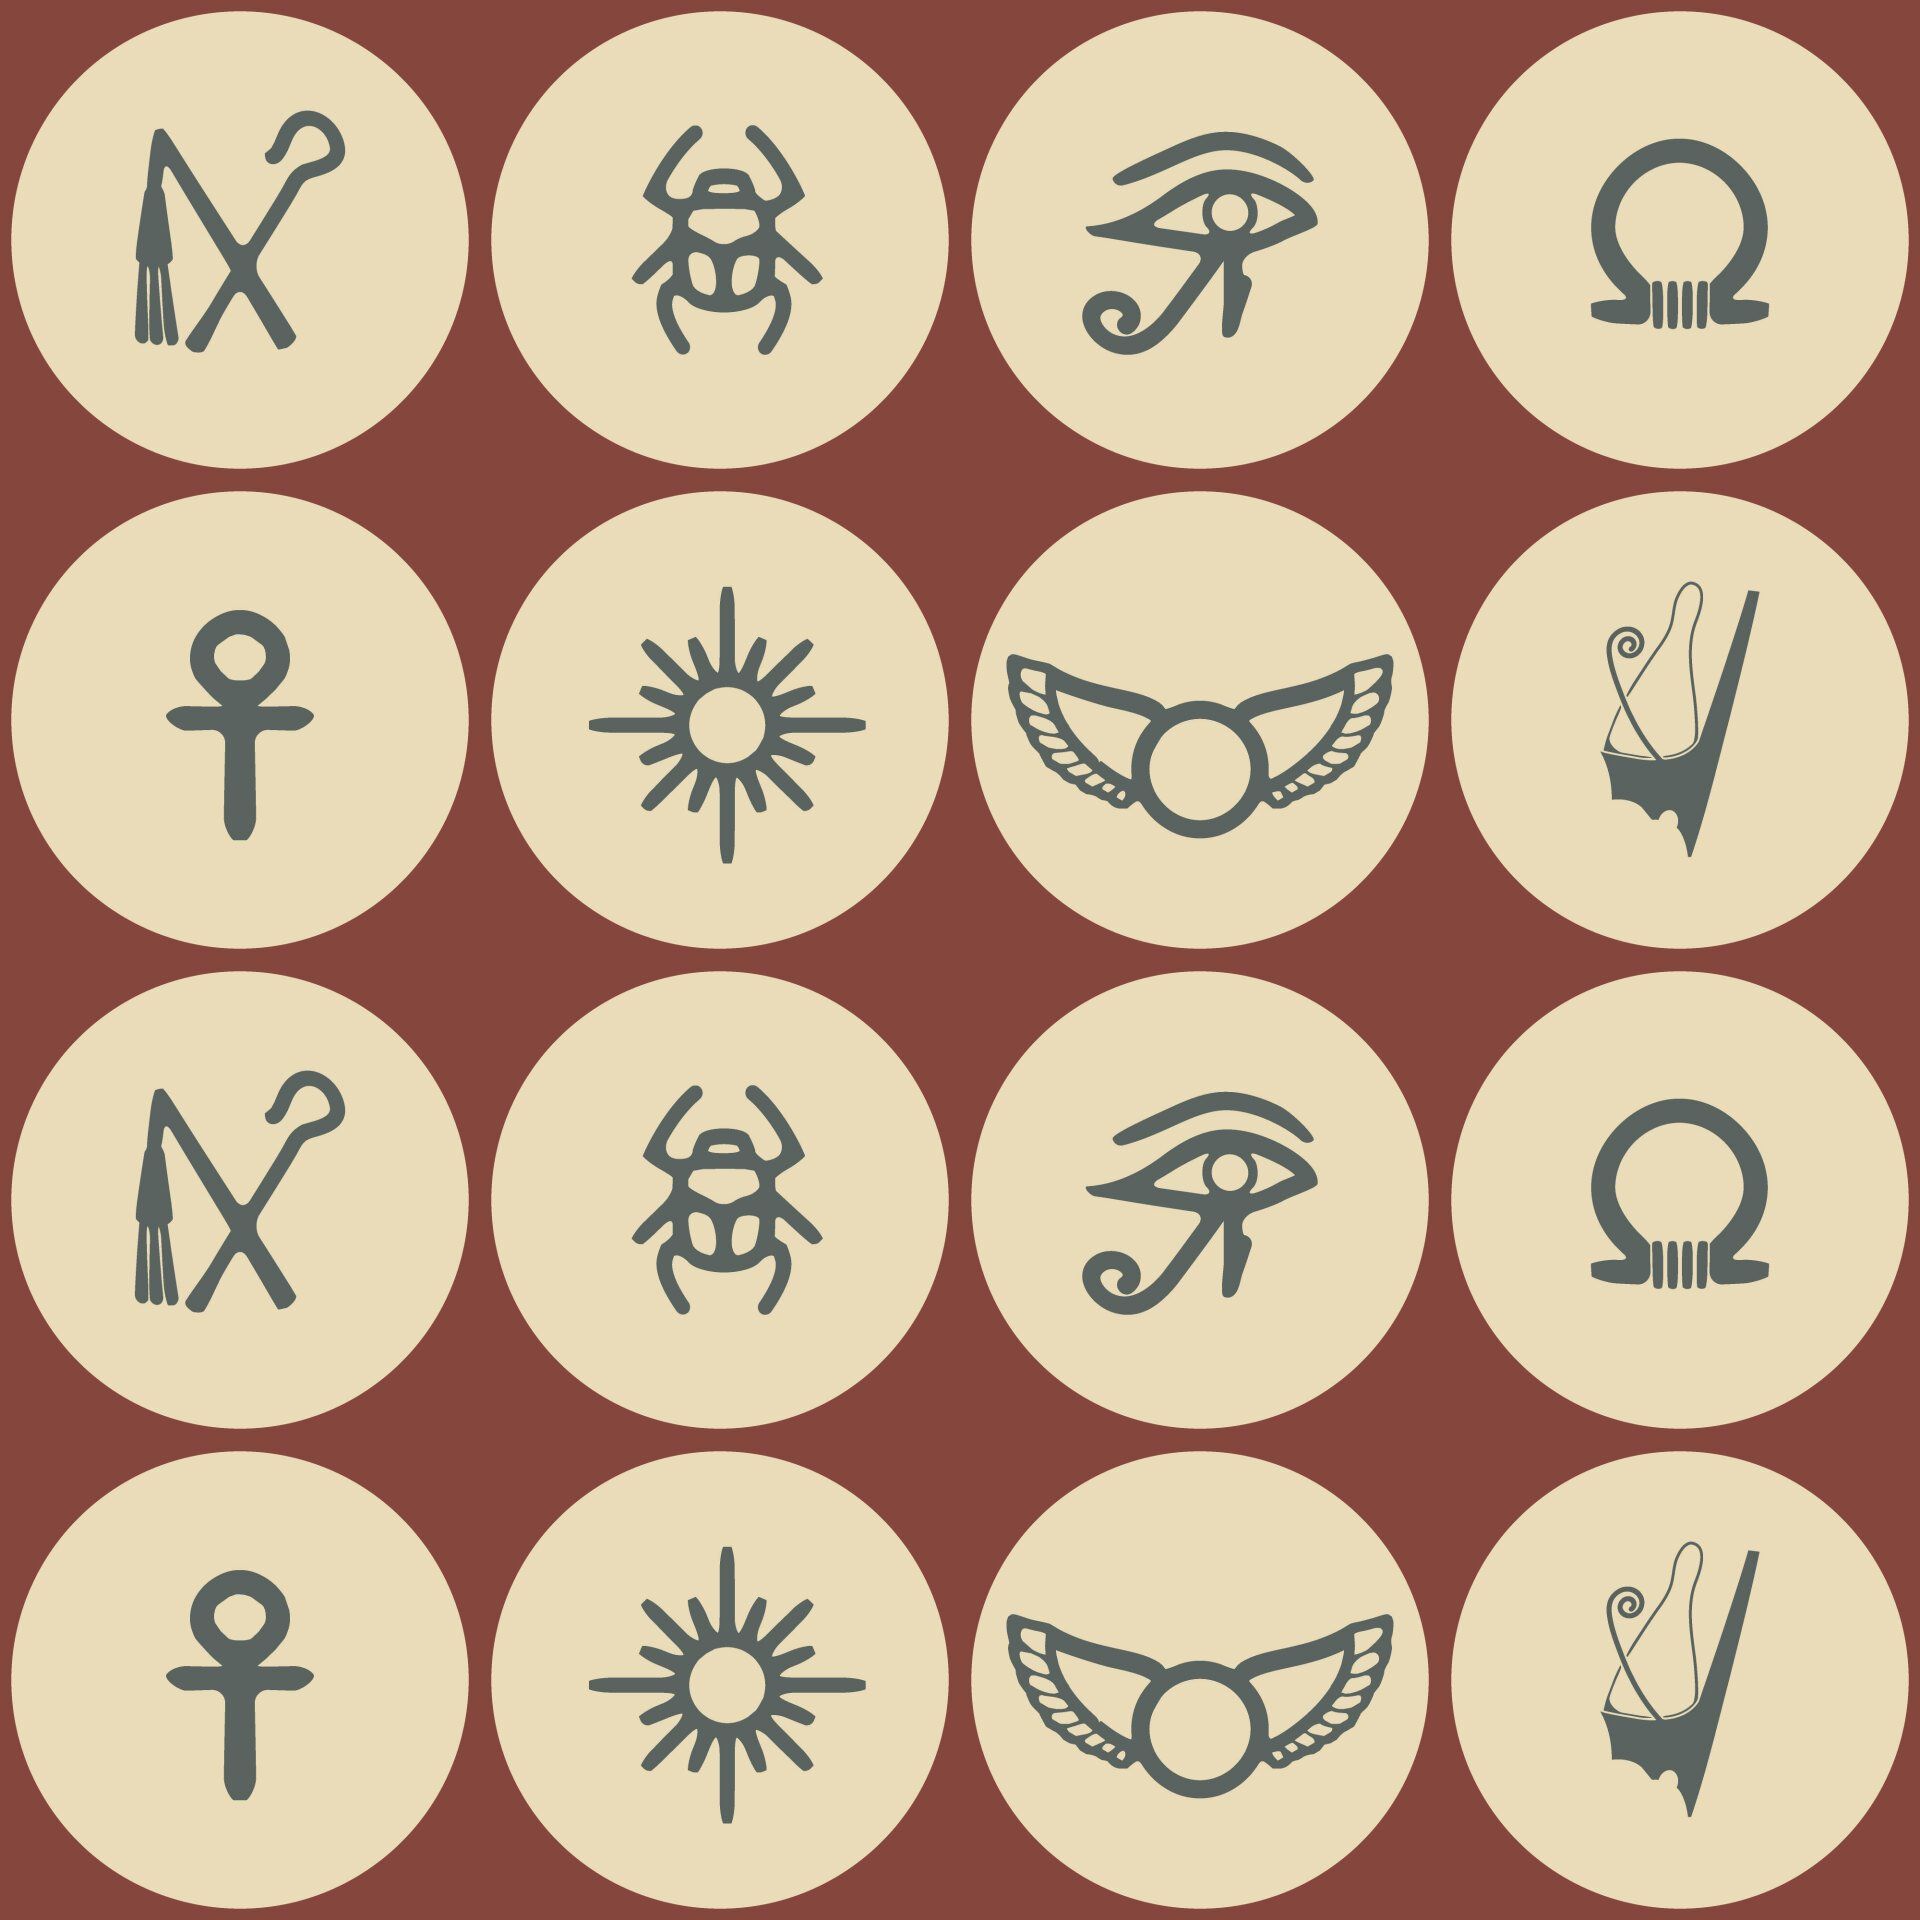 Top 30 Ancient Egyptian Symbols And Their Meanings Earnca